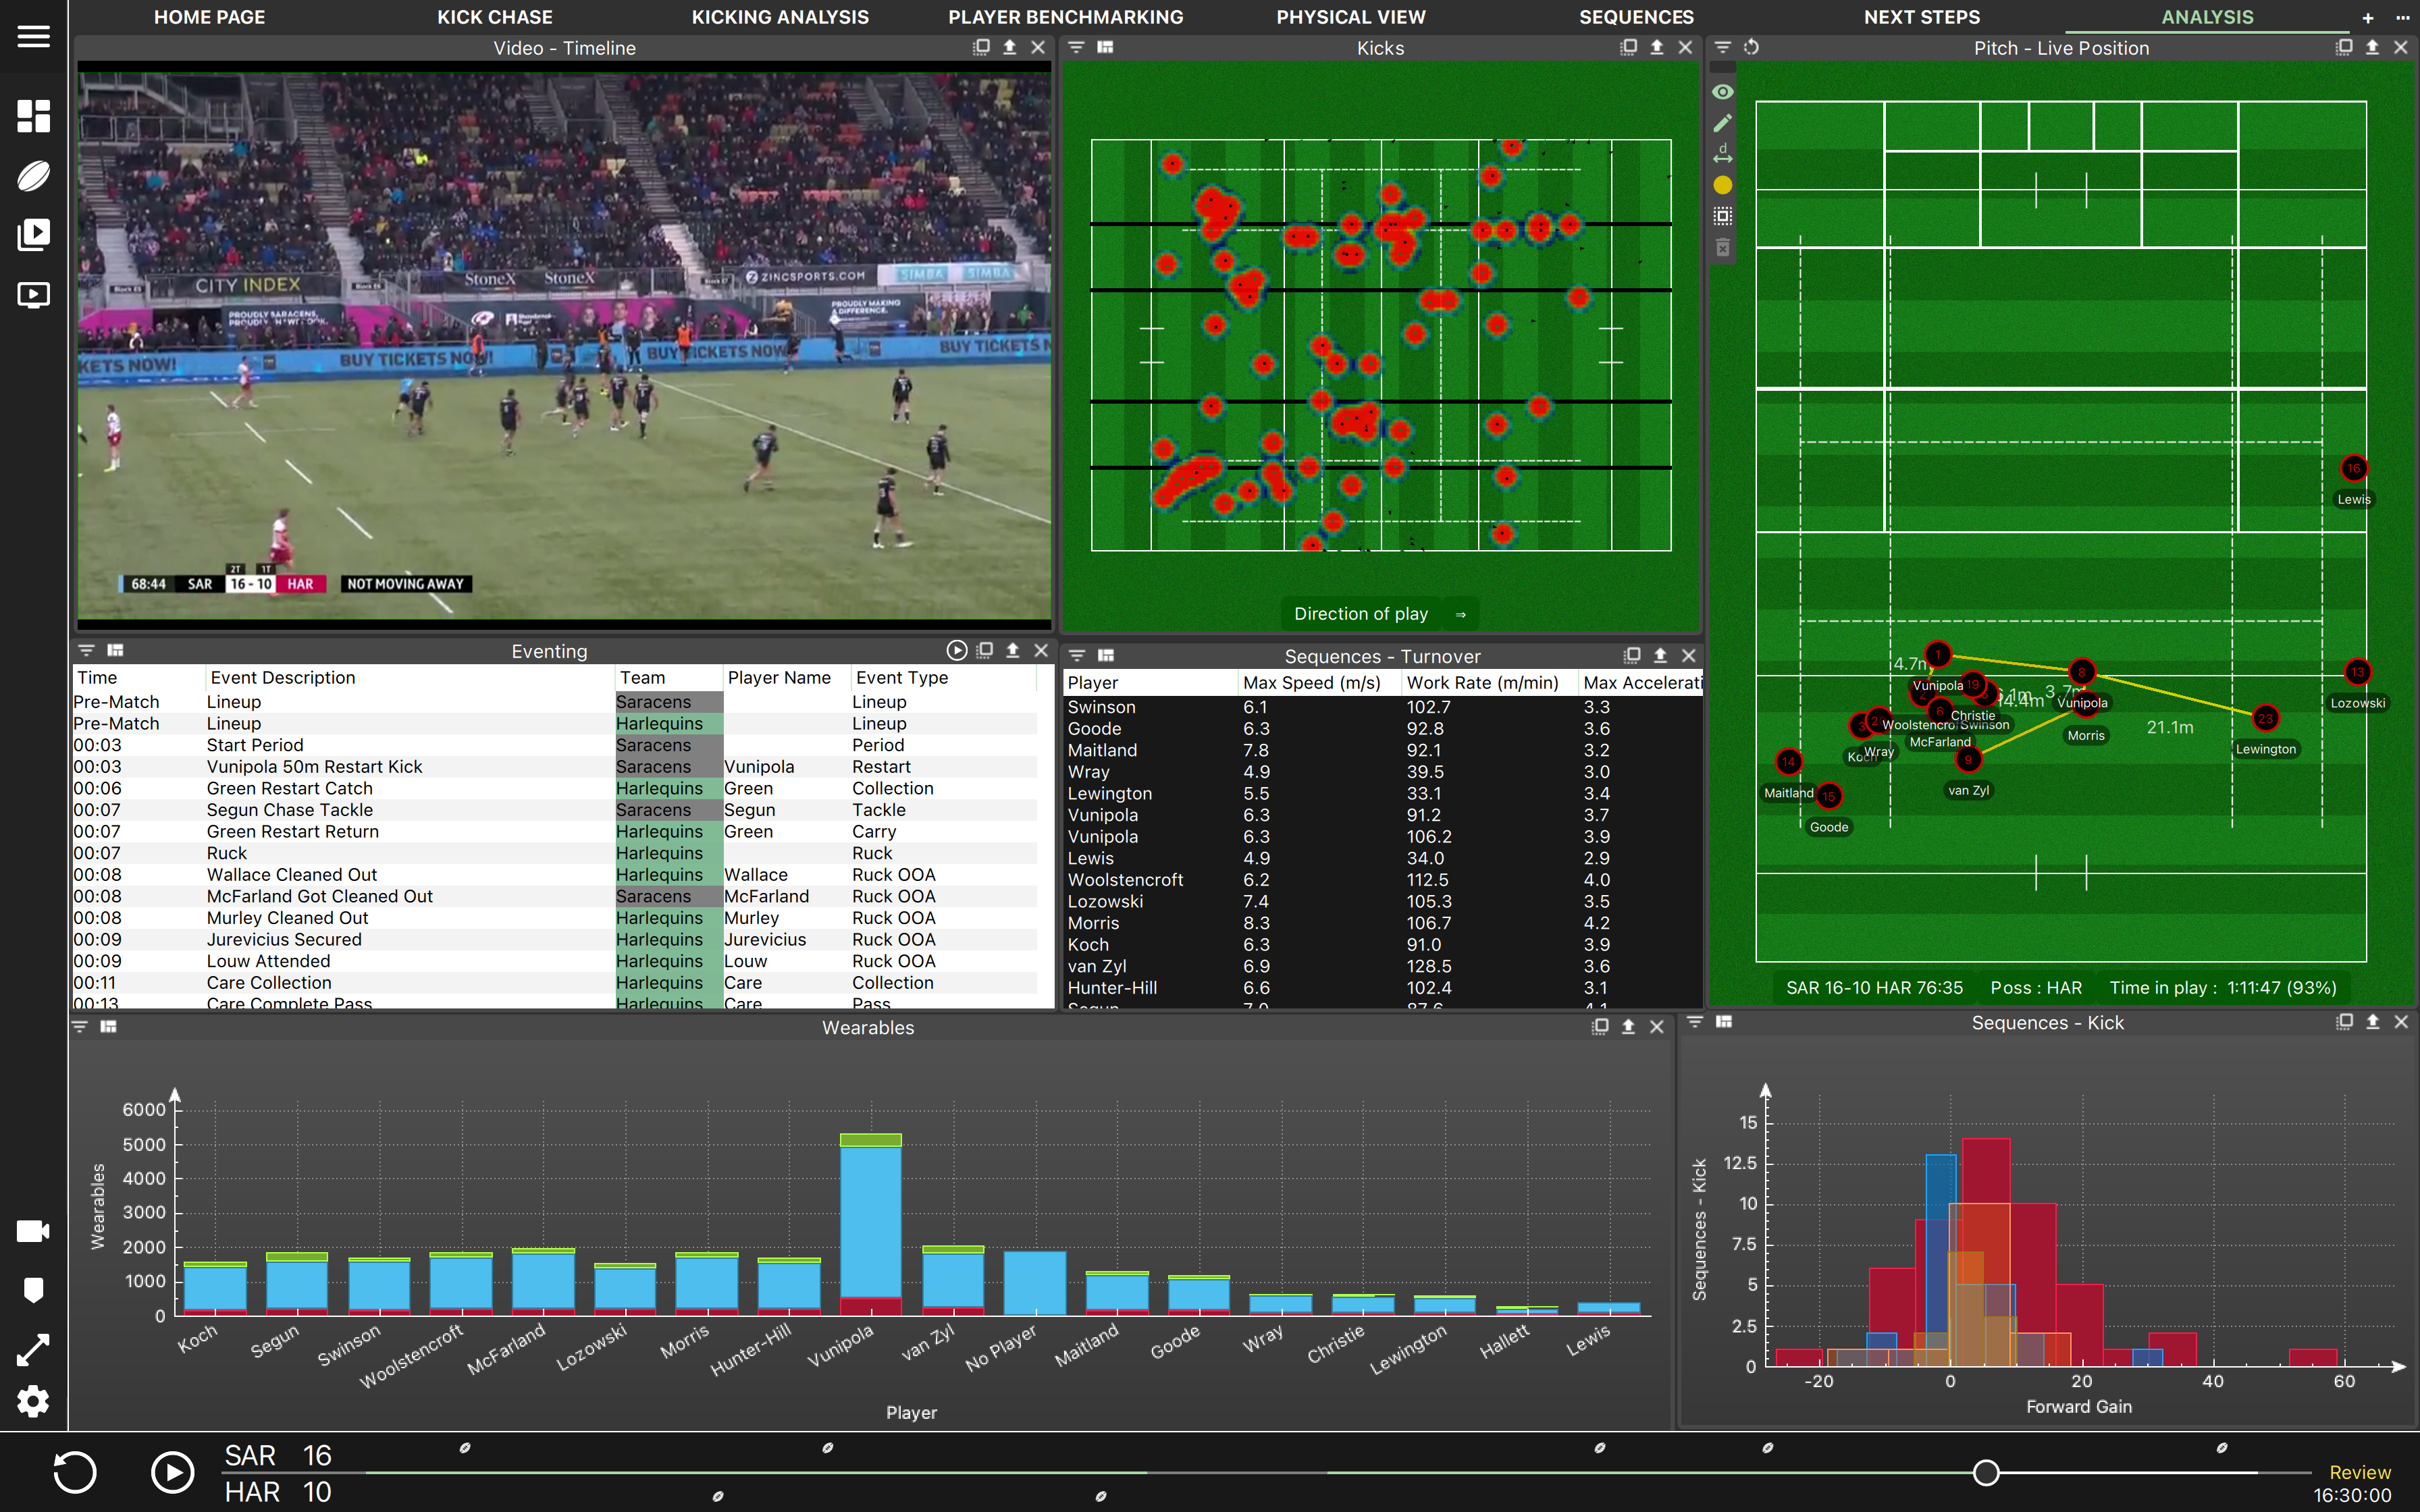 Catapult introduces another sport-specific software analytics